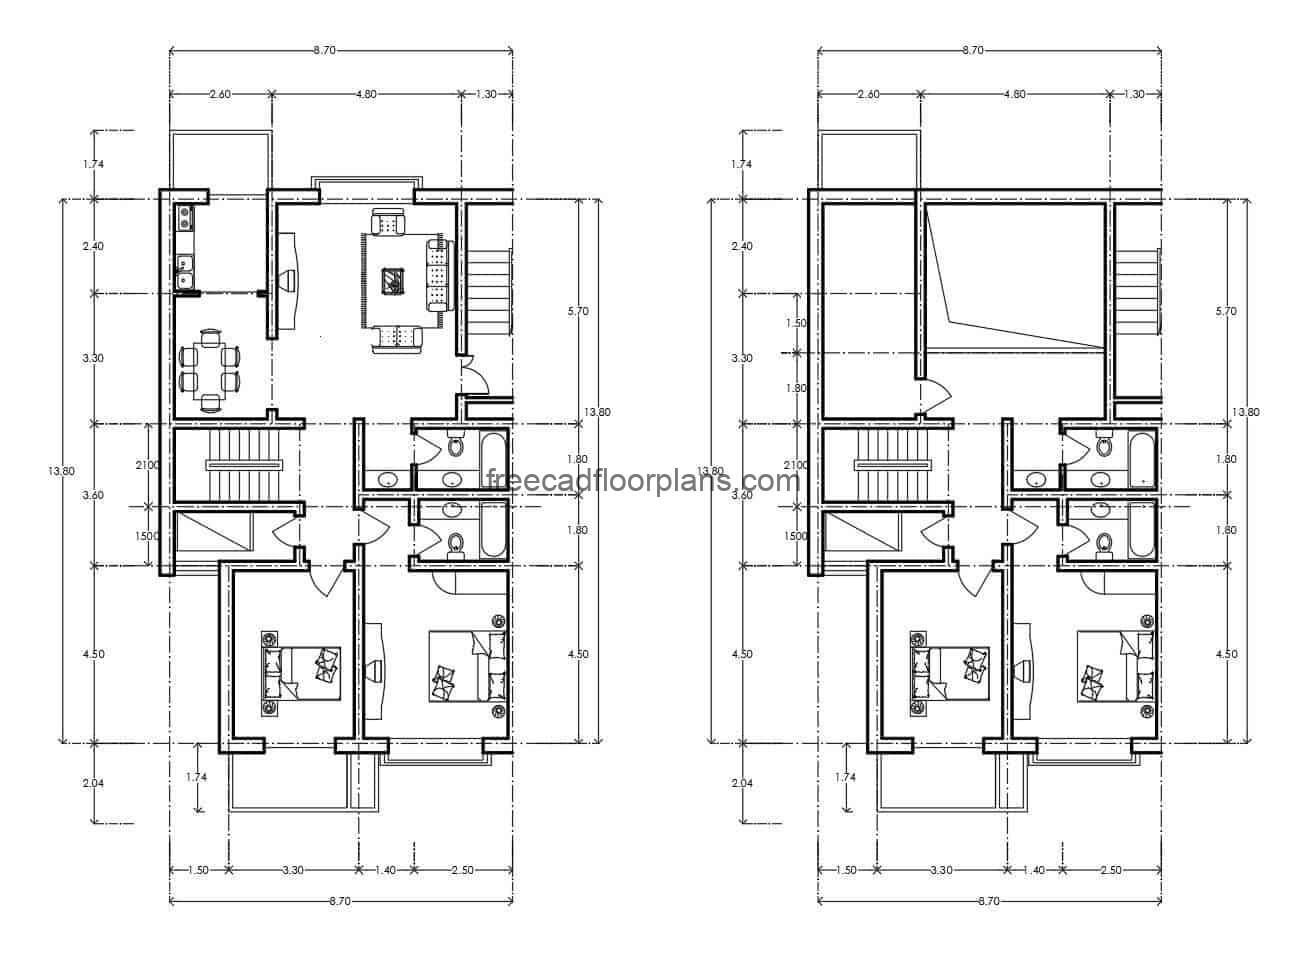 Architectural project of residential apartment in a plant with dimensions and distribution of spaces in DWG format of autocad, the project has room, kitchen, dining room, and private area with three bedrooms and two bathrooms.